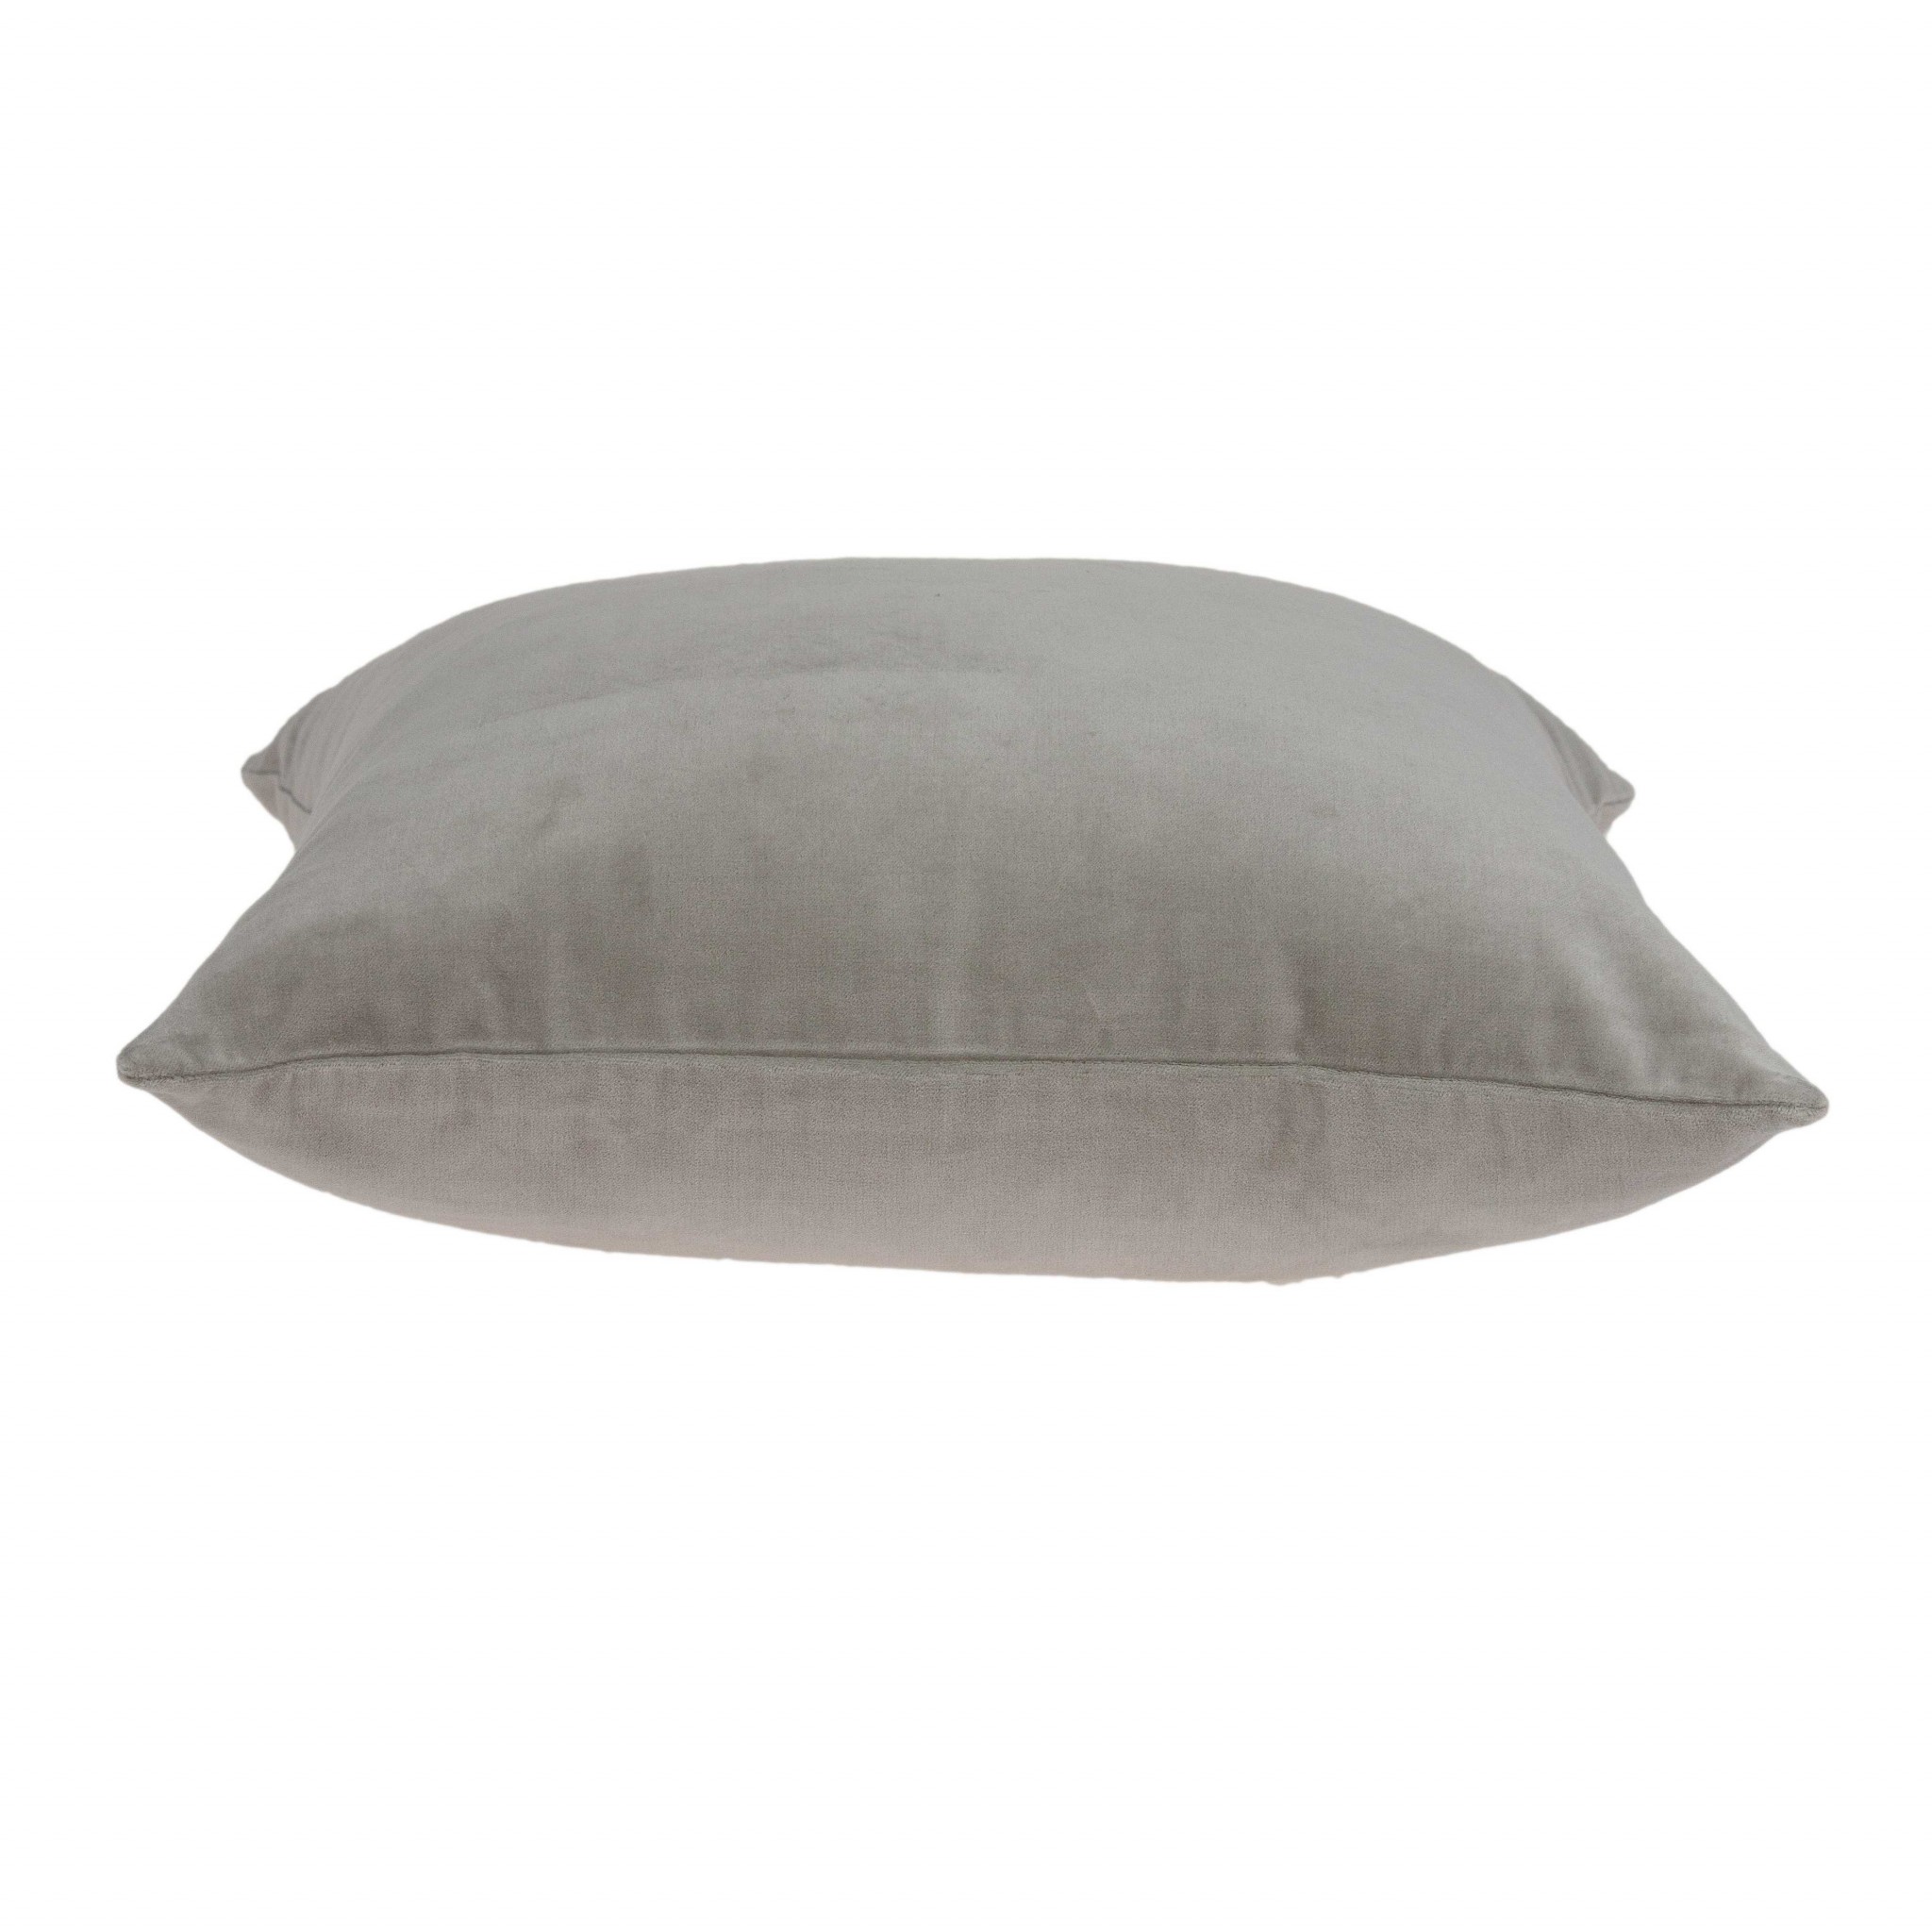 18" x 7" x 18" Transitional Gray Solid Pillow Cover With Poly Insert